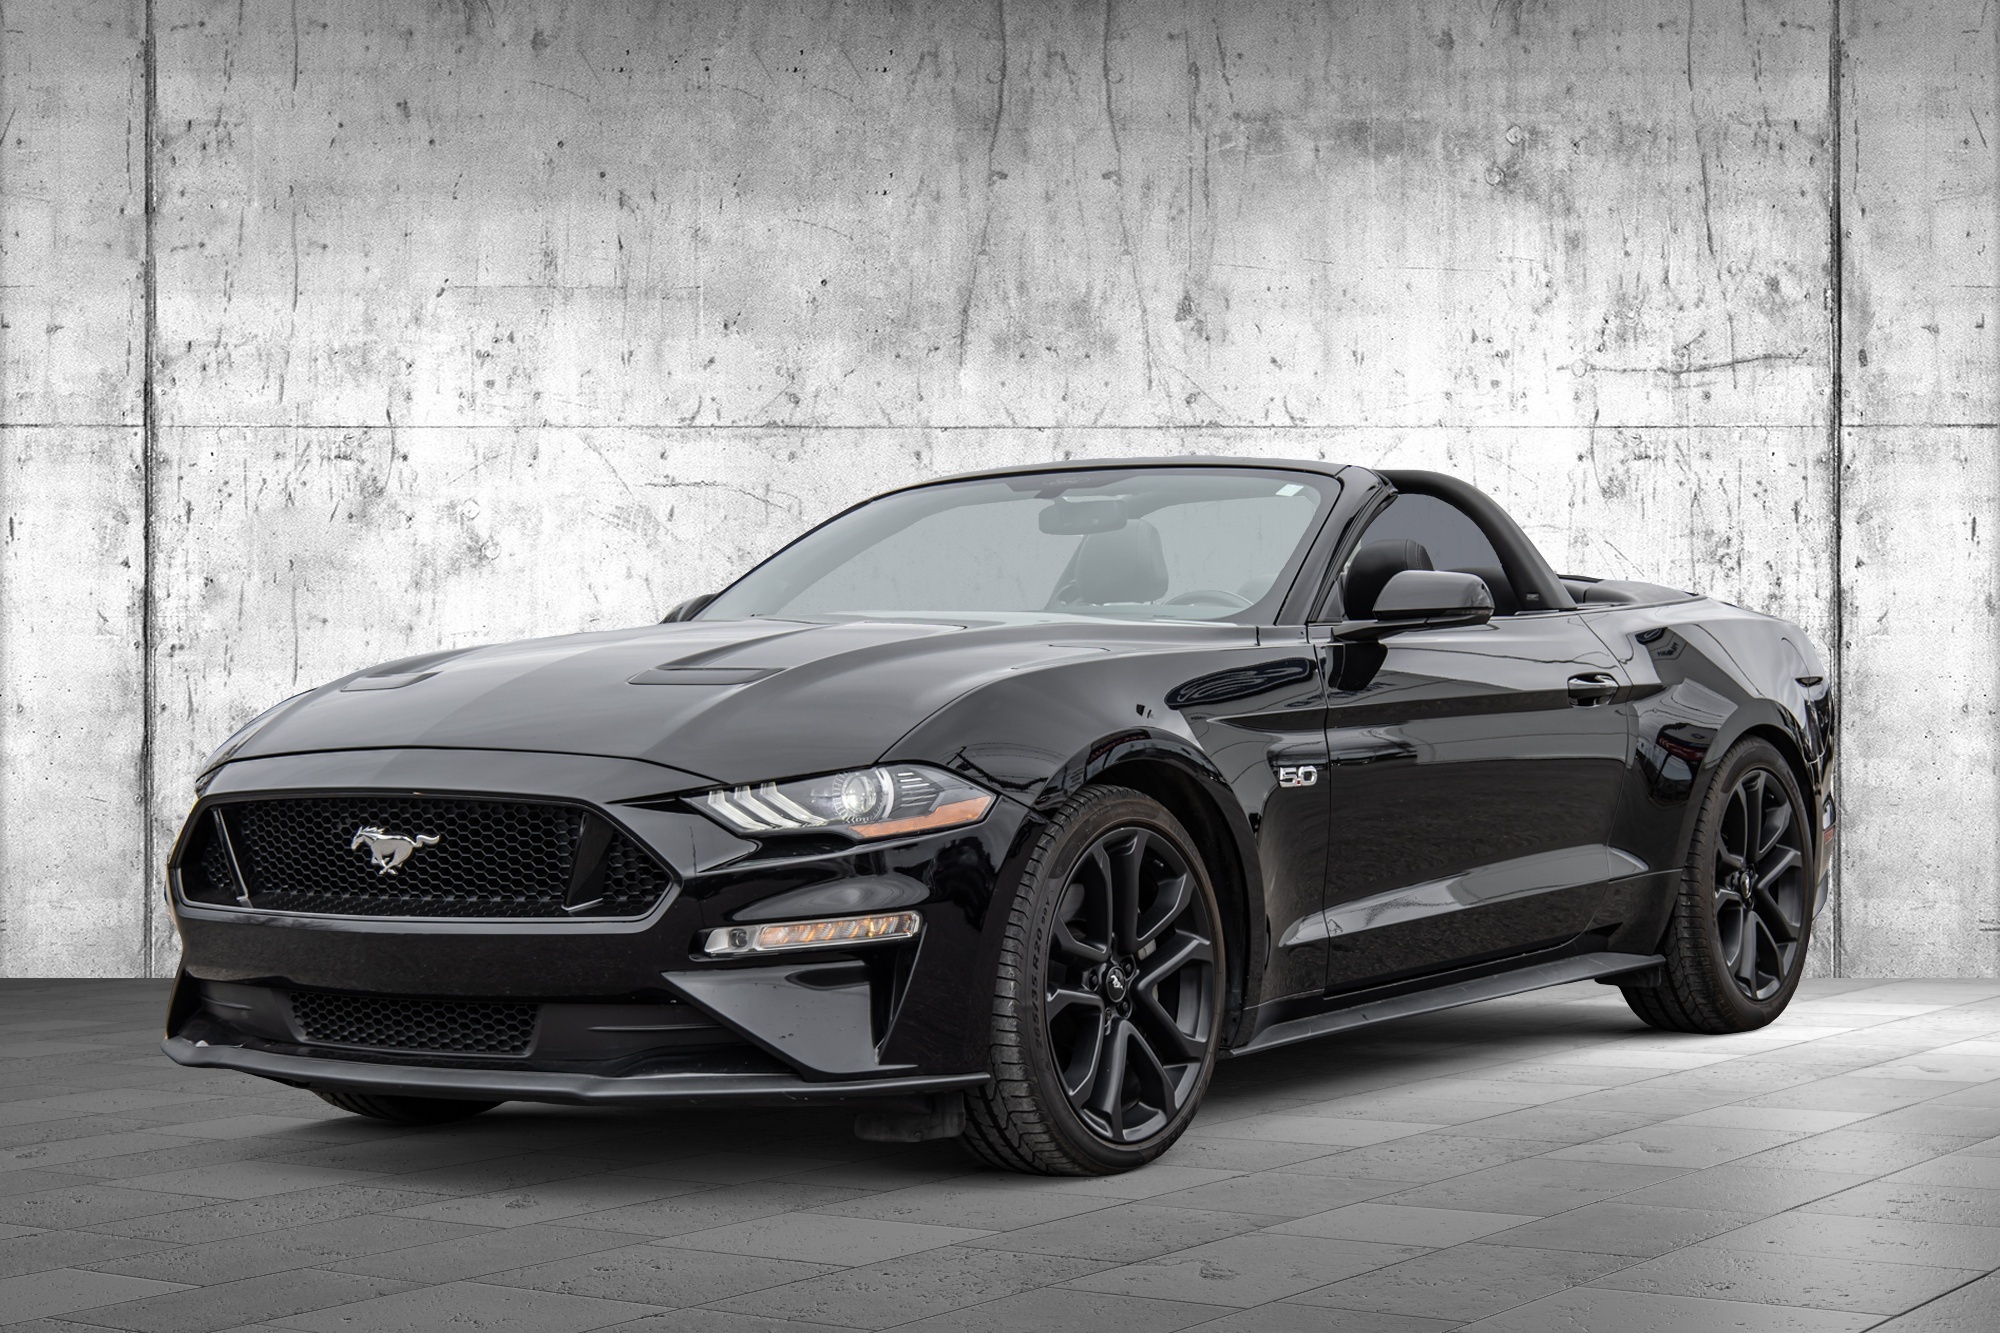 2018 Ford Mustang GT PREMIUM CONVERTIBLE 5.0L CUIR BLETOOTH 